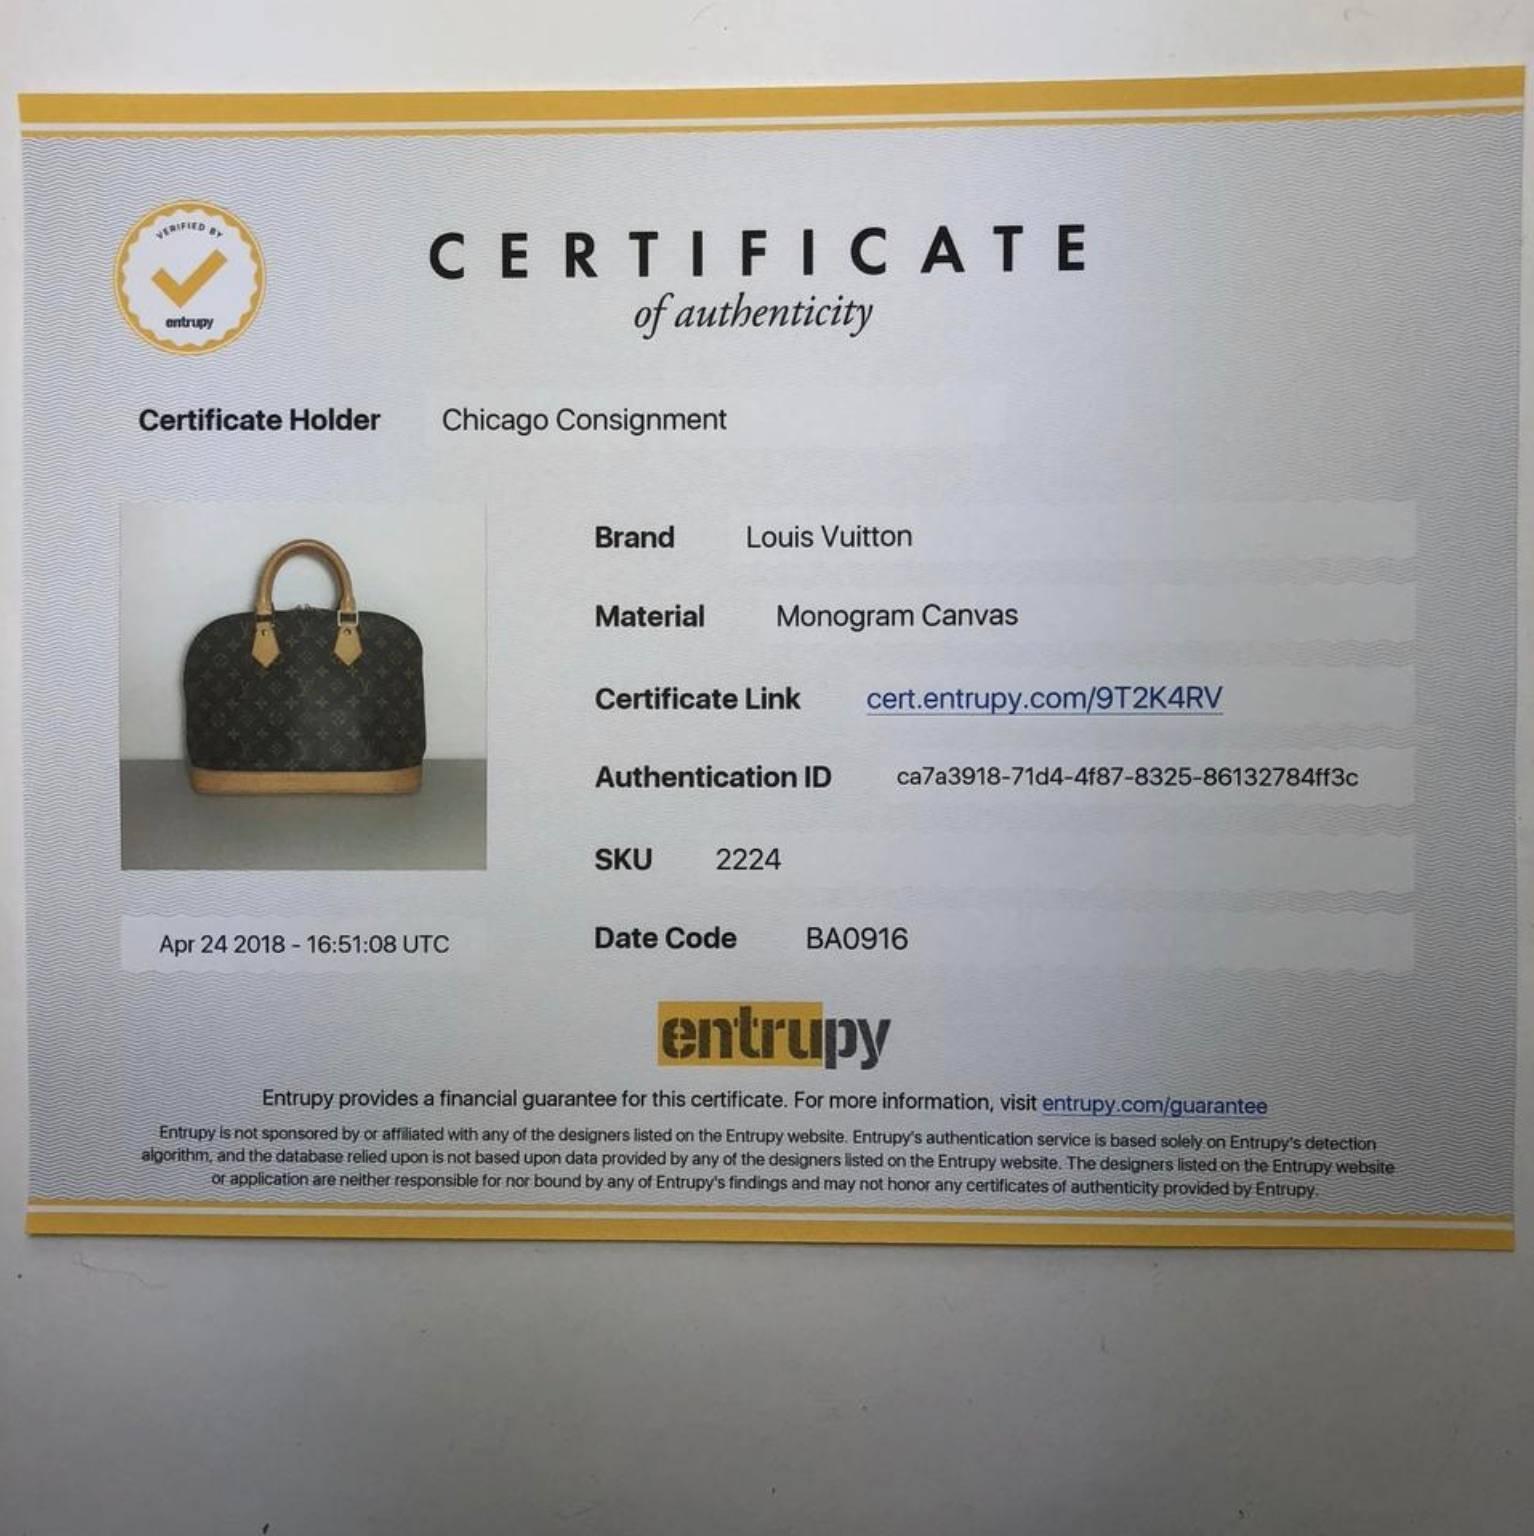 MODEL - Louis Vuitton Monogram Alma PM

CONDITION - Exceptional. Light vachette with minor watermarks, no dryness and no cracking. Bright and shiny hardware with no tarnishing or chipping. No rips, holes, tears, stains or odors. Piece maintains